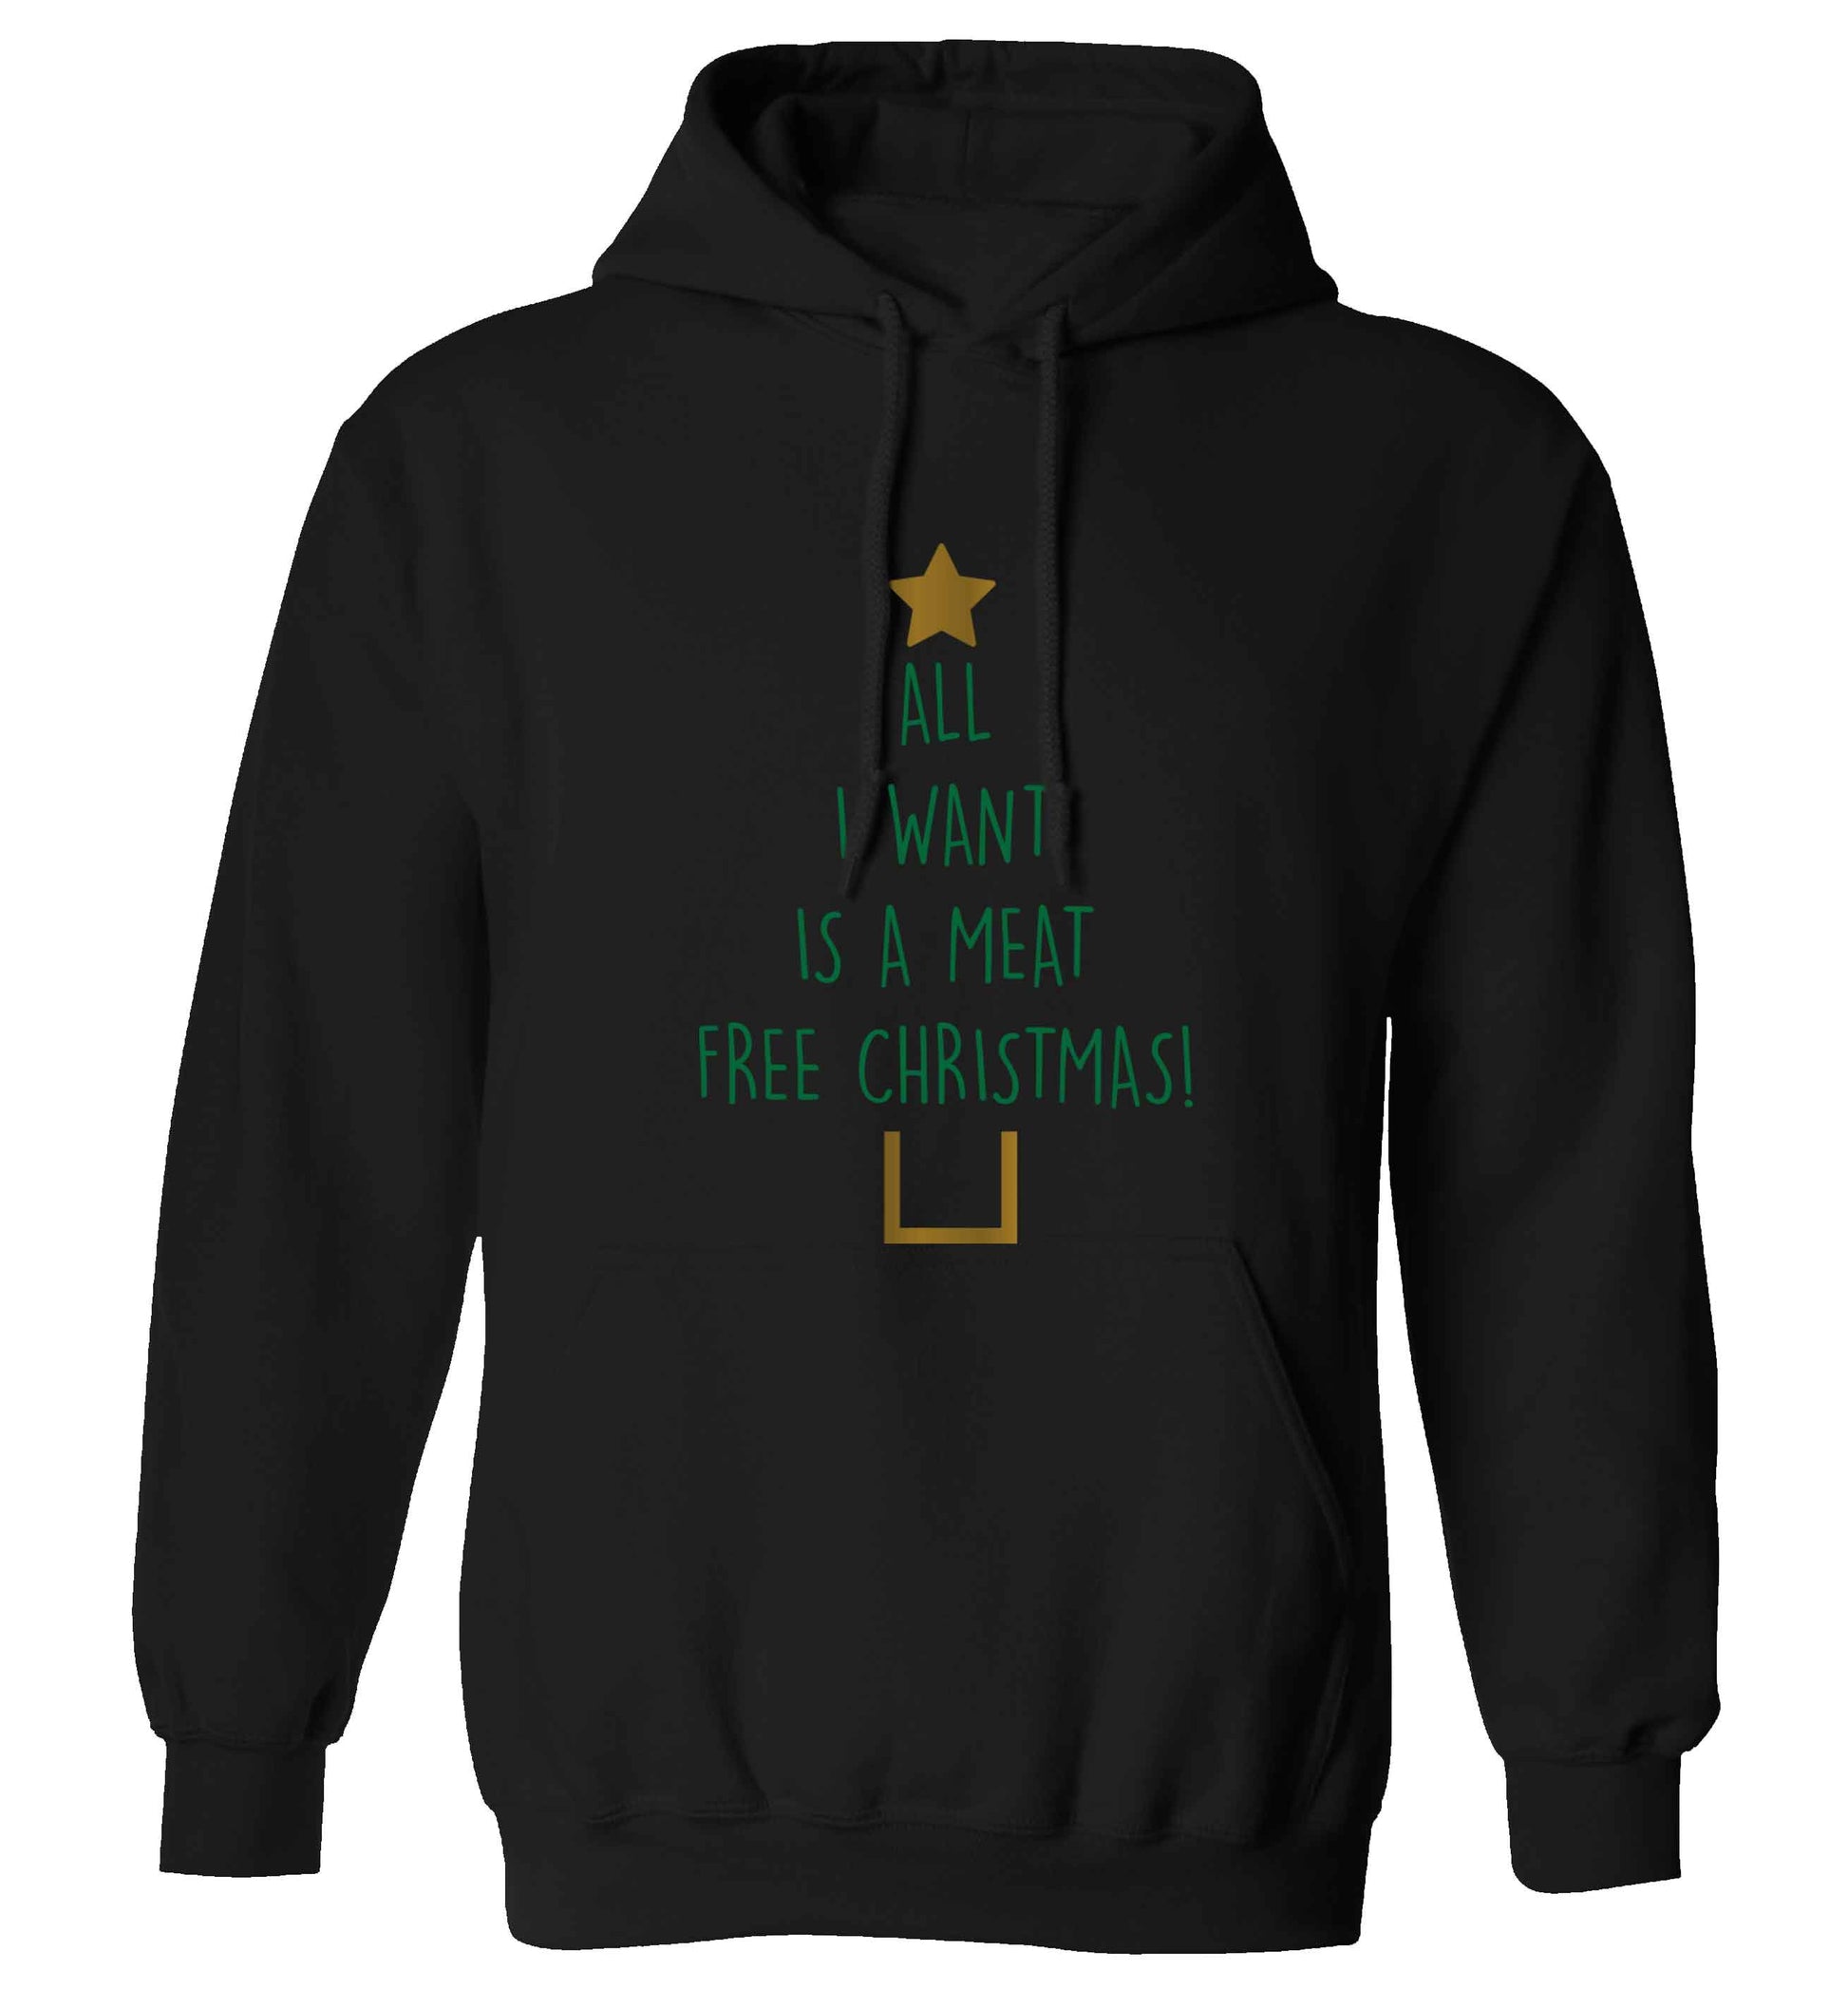 All I want is a meat free Christmas adults unisex black hoodie 2XL